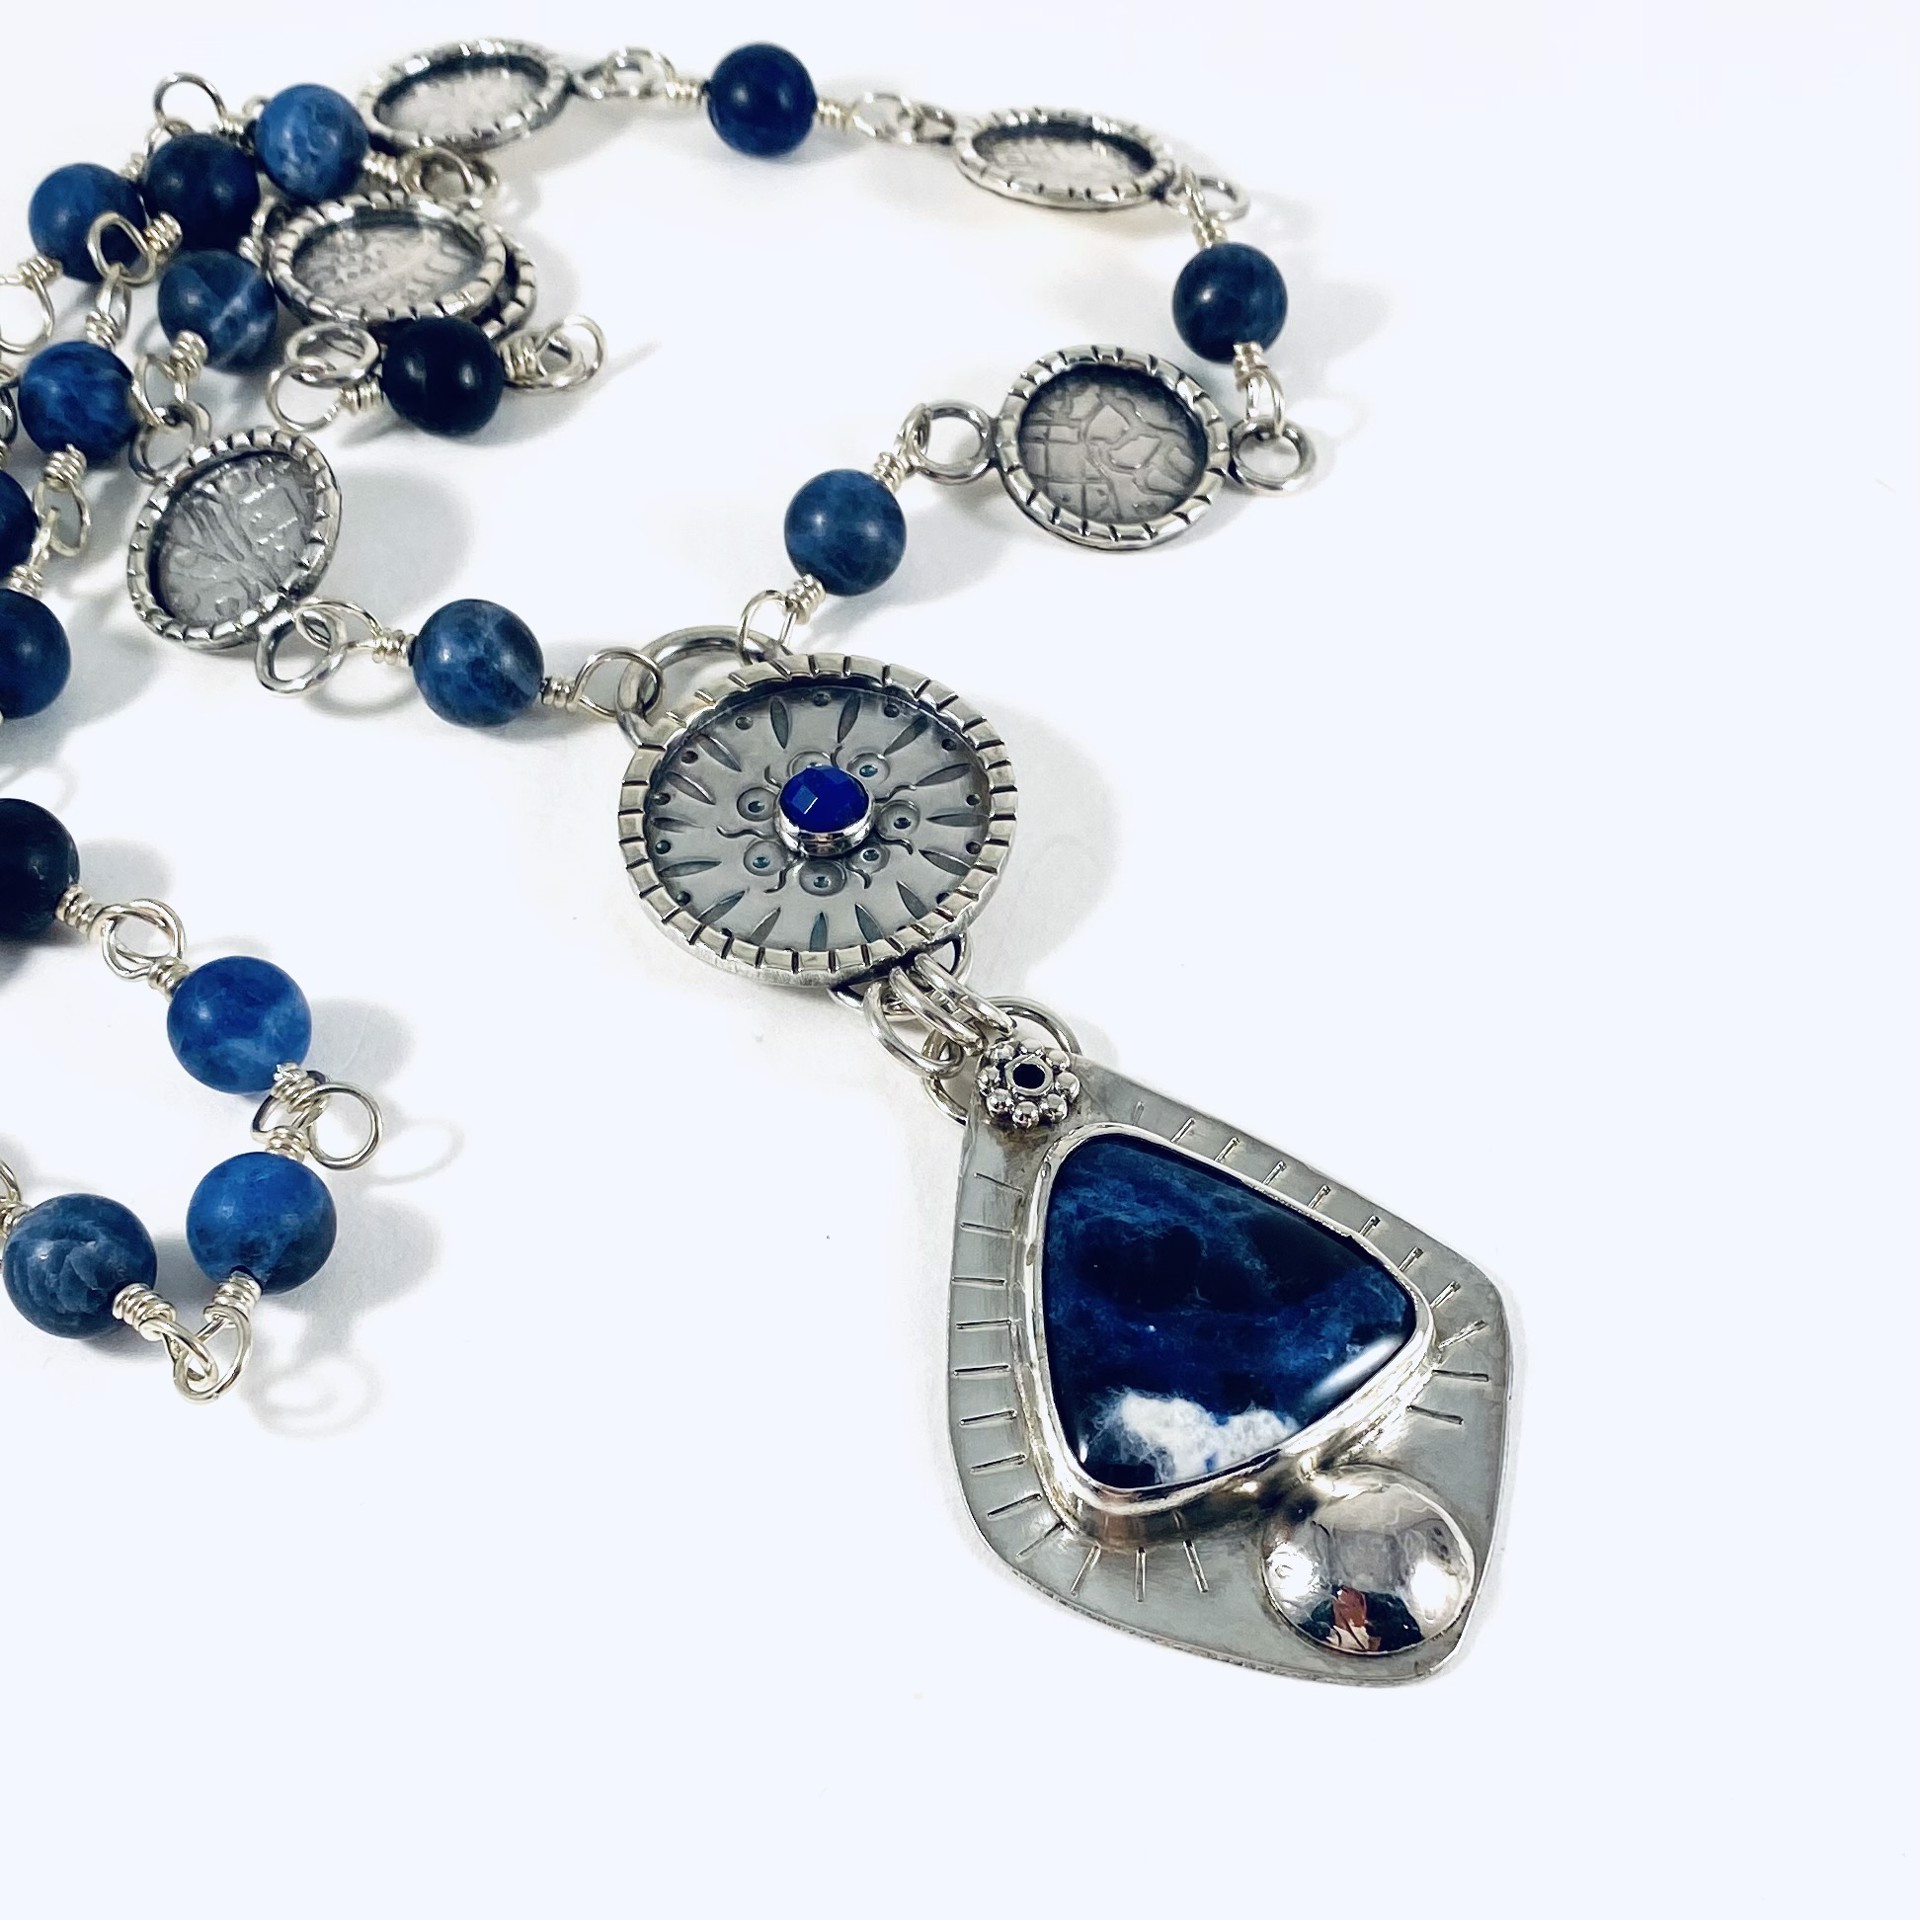 Lapis, Sodalite (3.5")Pendant on 26" Sterling and Bead Chain Necklace AB21-26 by Anne Bivens